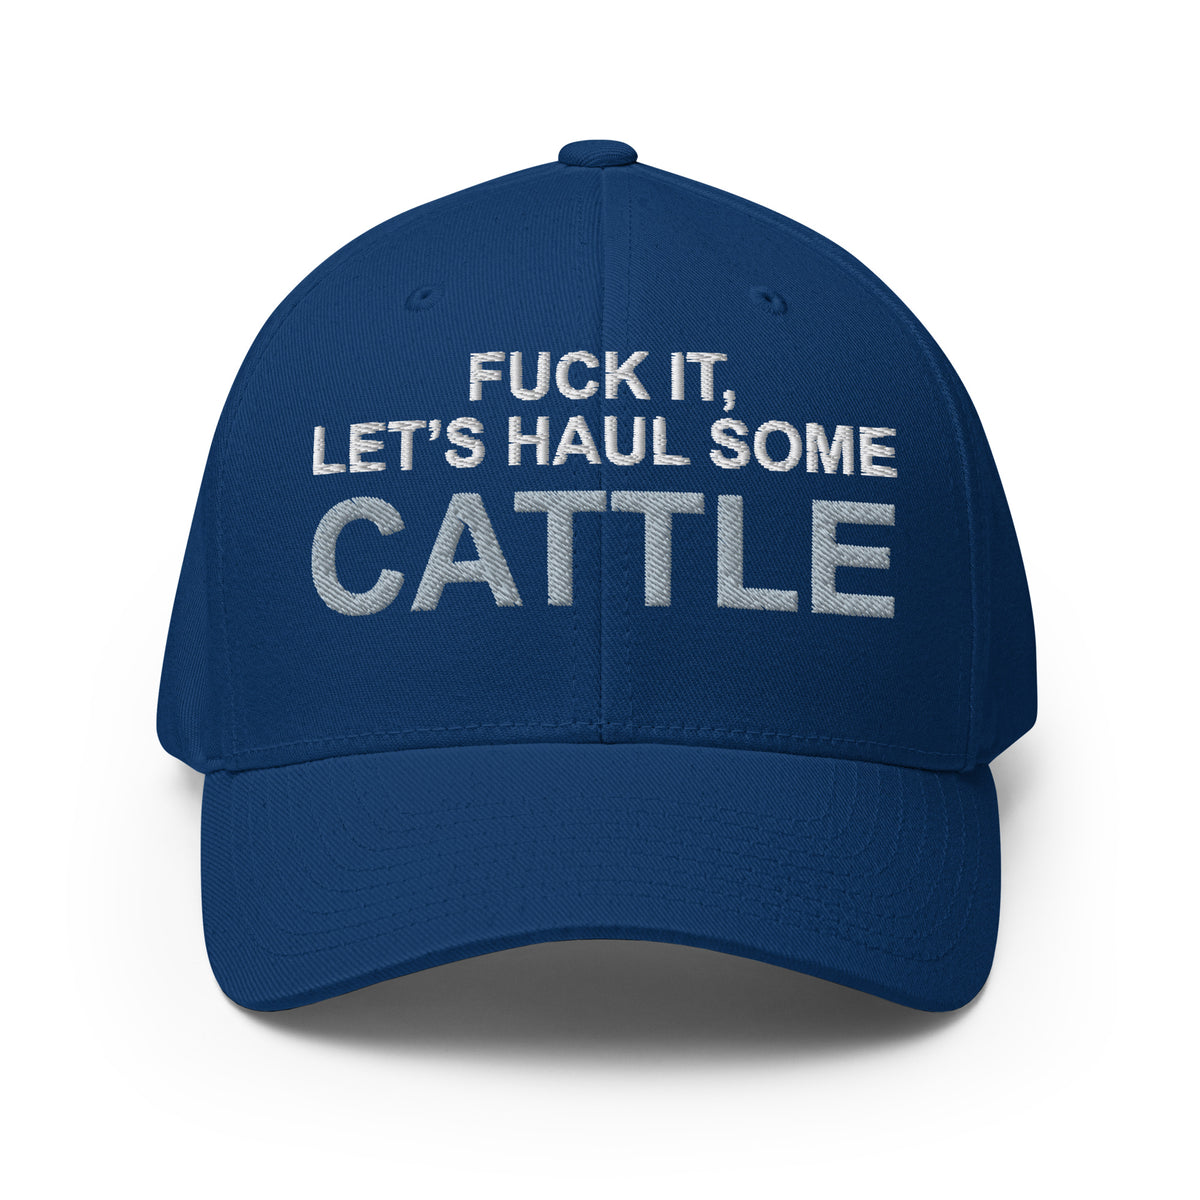 Fuck It, Let's Haul Some Cattle - Fitted Hat - Free Shipping